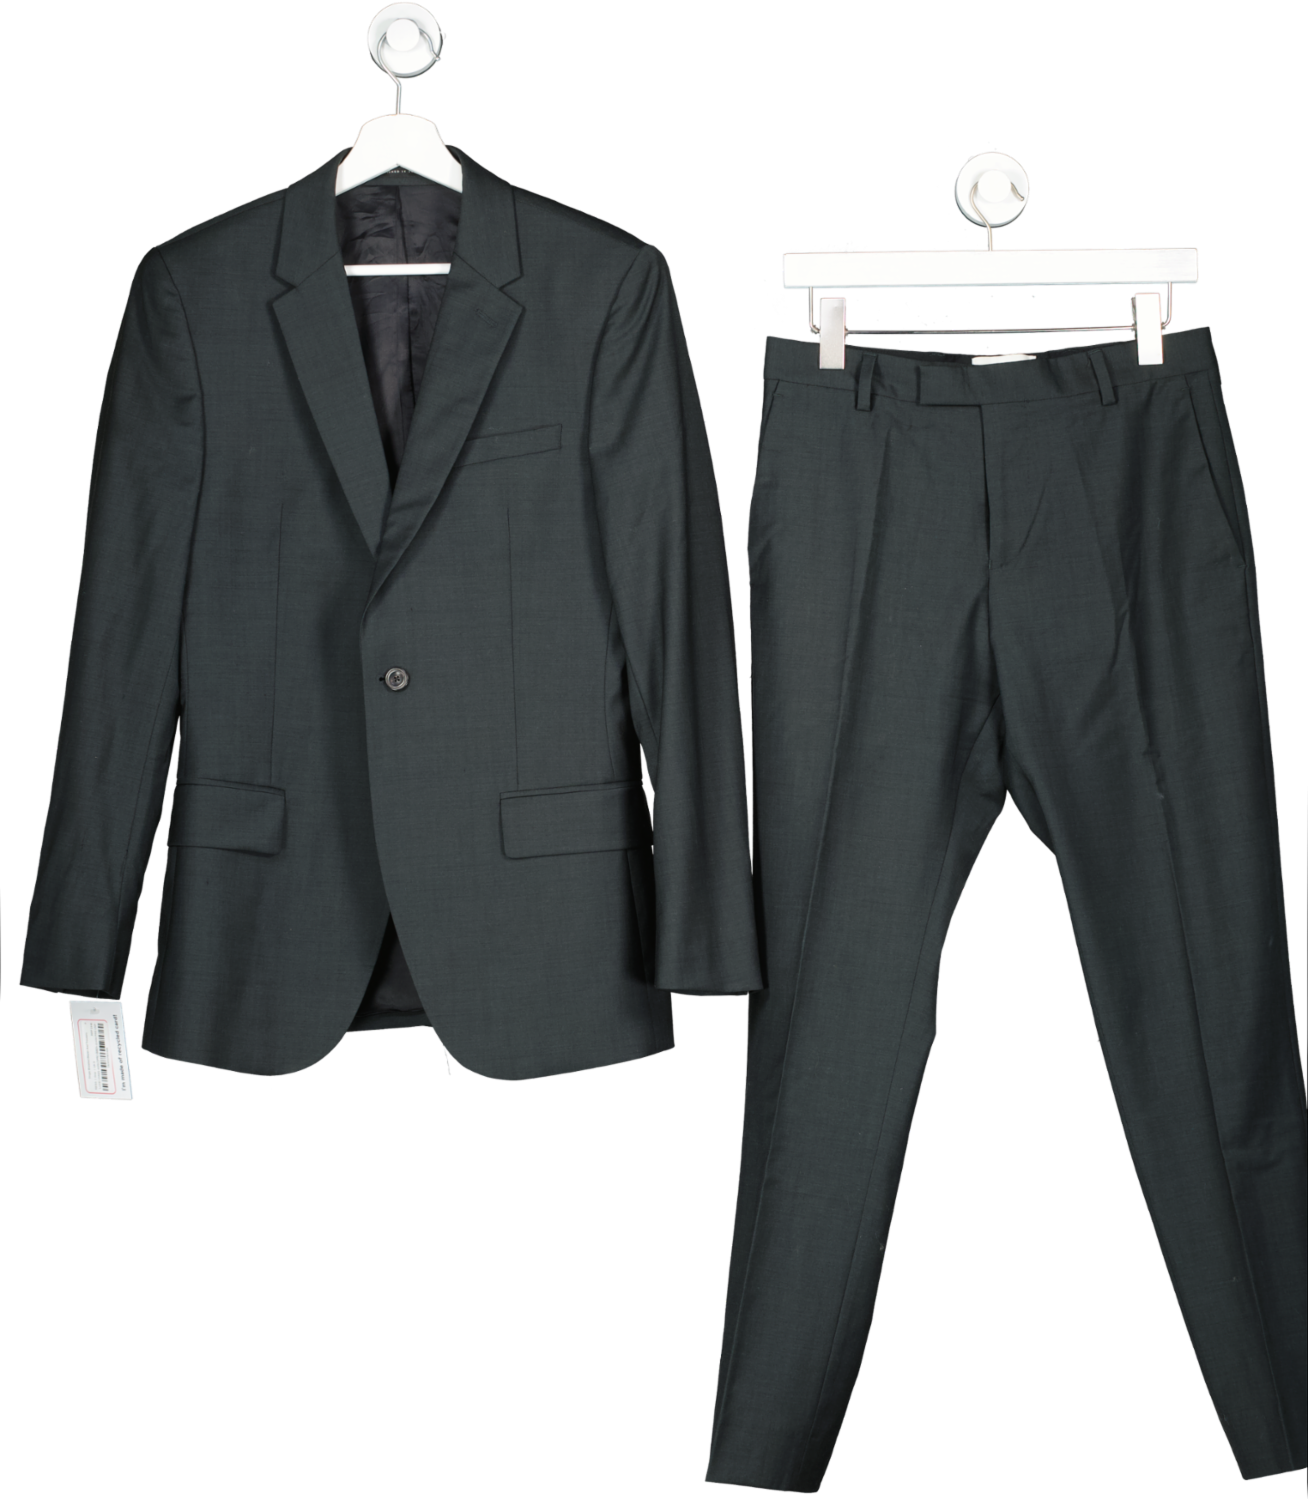 REISS Grey Single Breasted Blazer And Trousers UK S